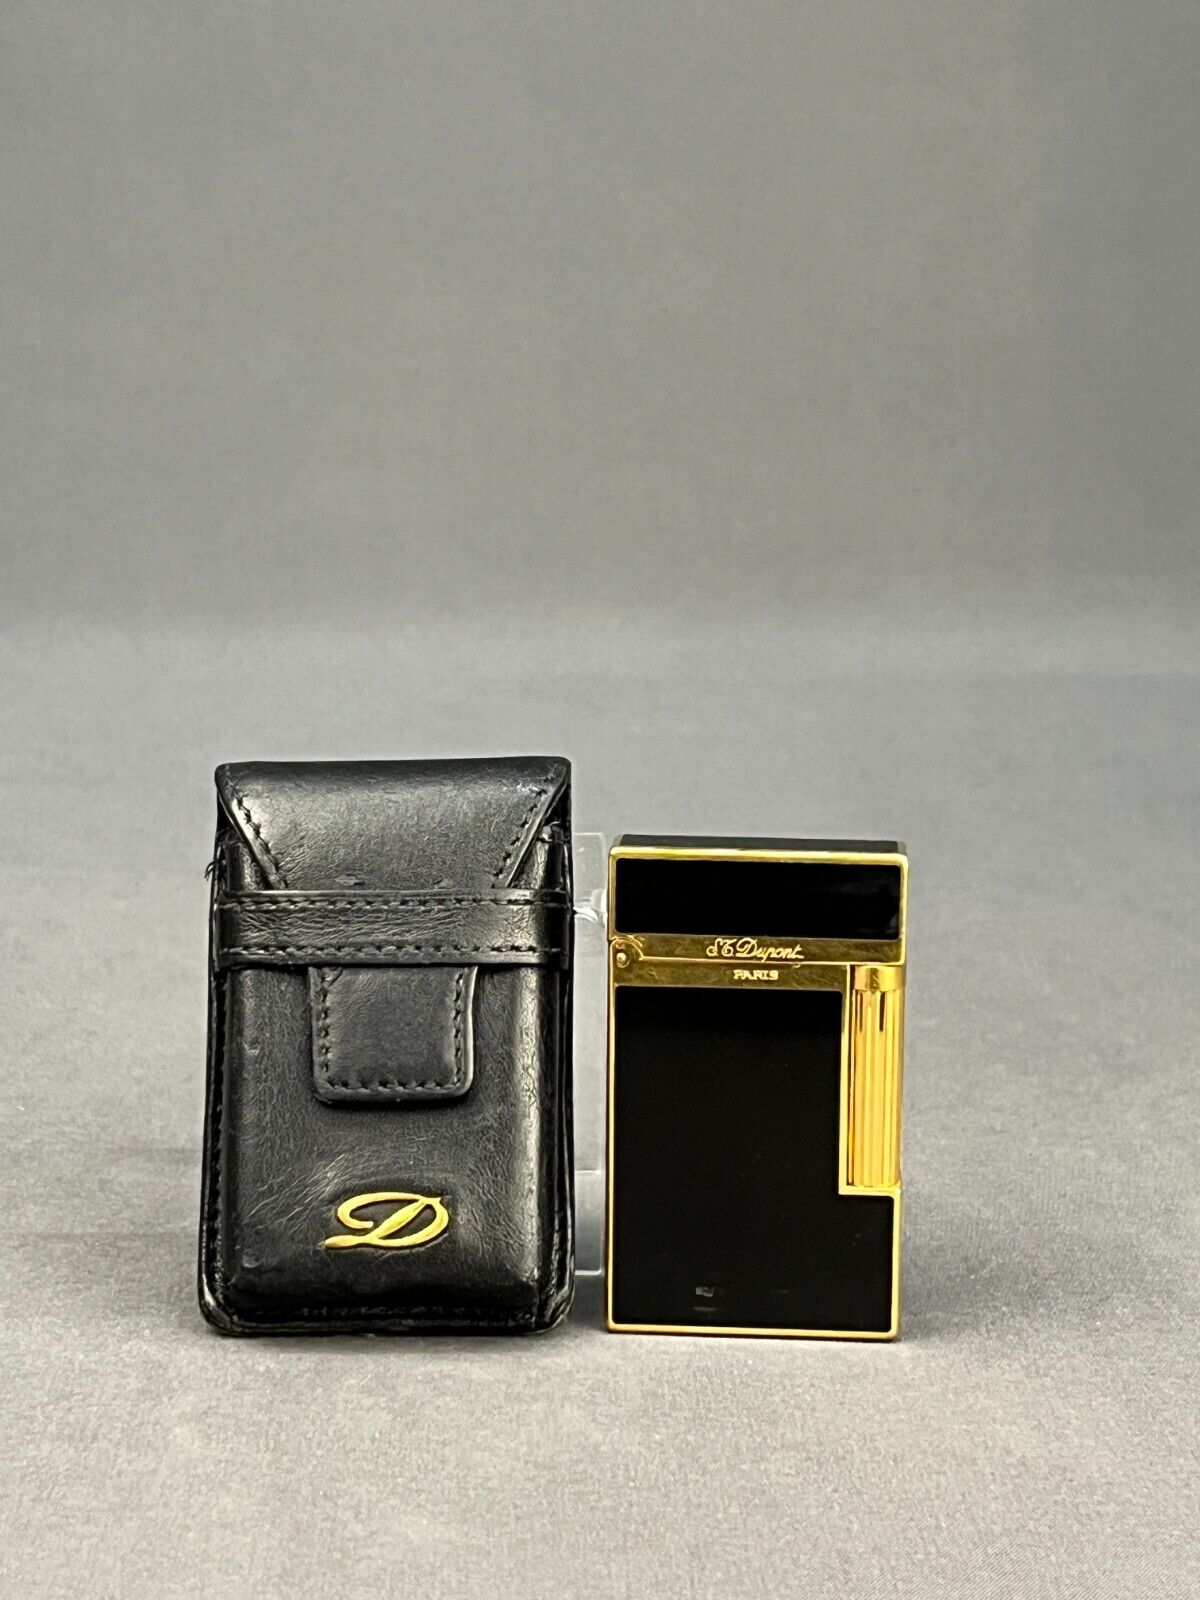 S.T. Dupont Line 2 Black Lacquer & Gold Trim Dual Flame Lighter w/Leather Case